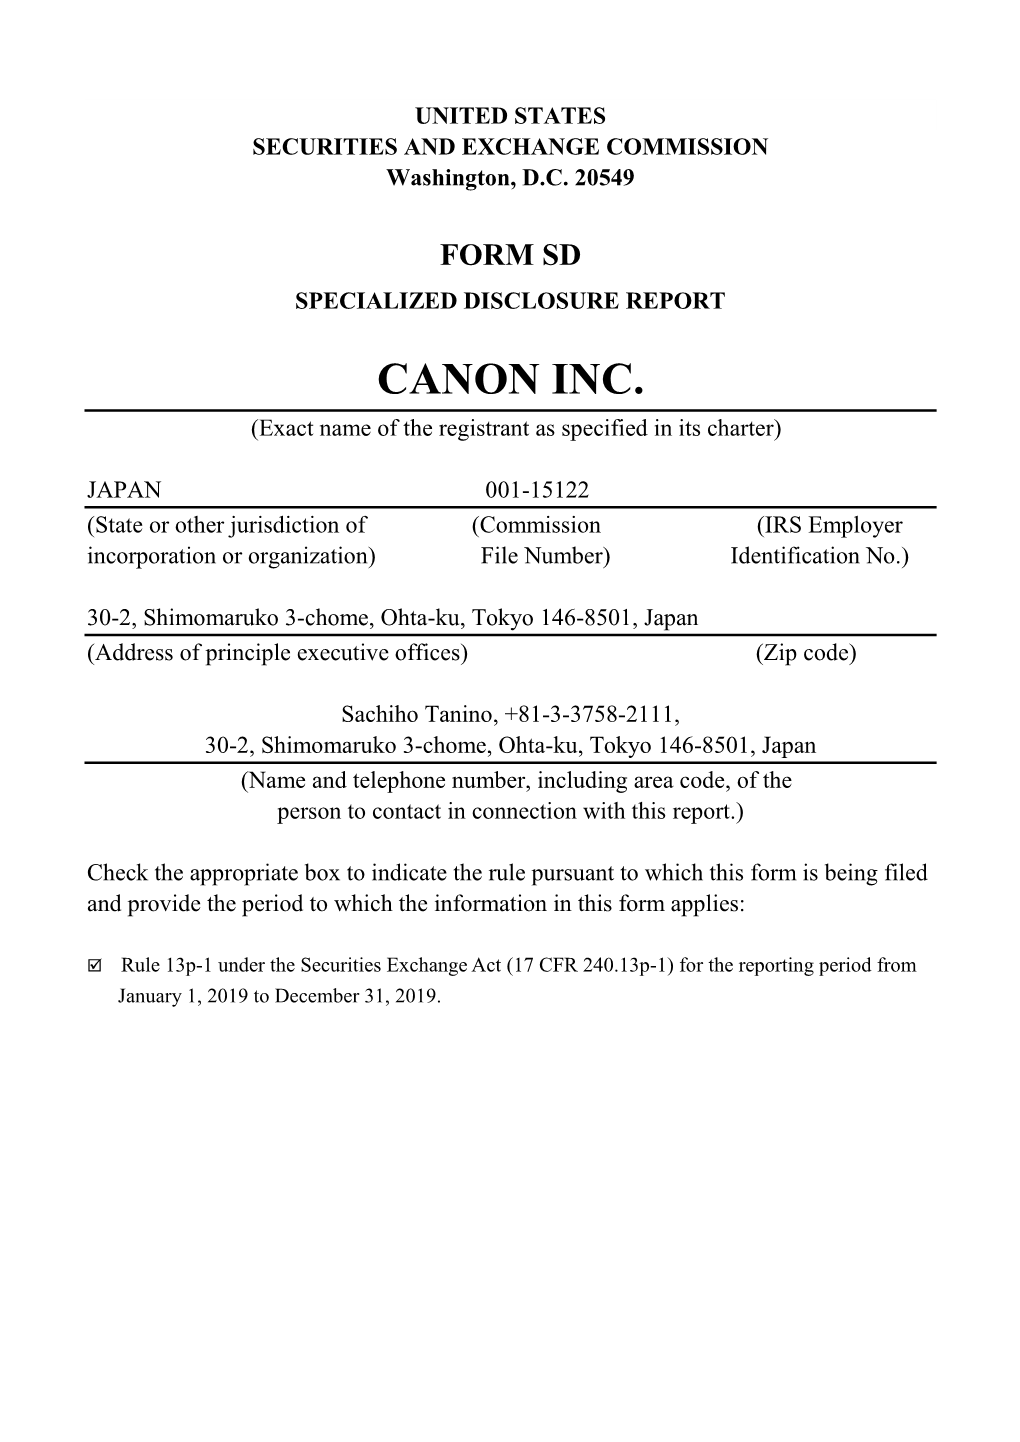 CANON INC. (Exact Name of the Registrant As Specified in Its Charter)